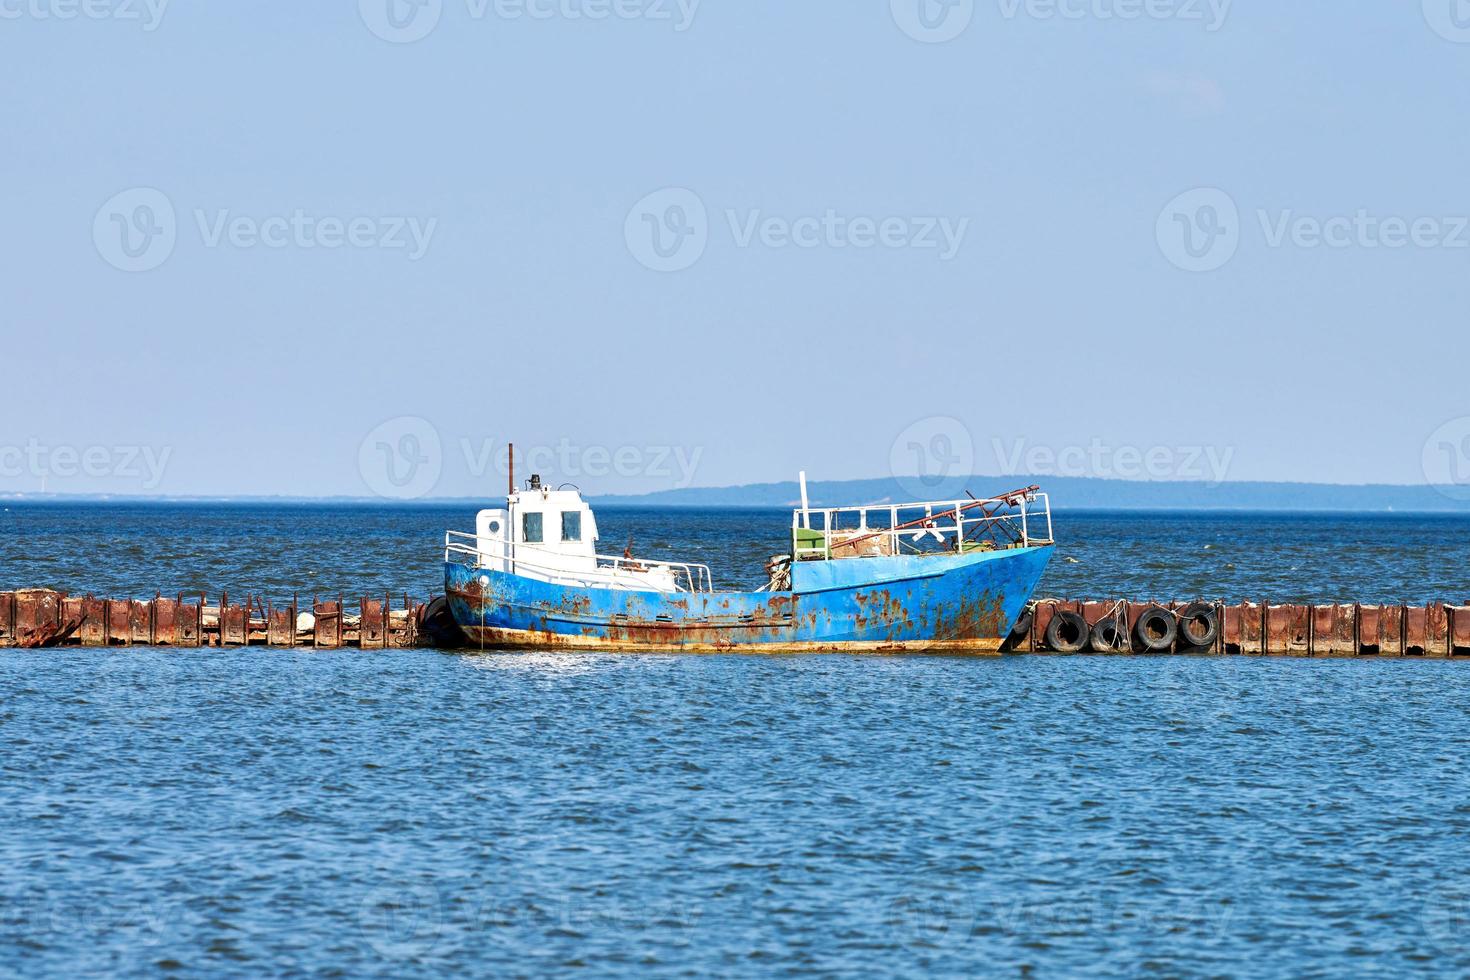 Rusty old abandoned fishing boat moored to rusty pier, wrecked weathered fishing trawler on sea photo